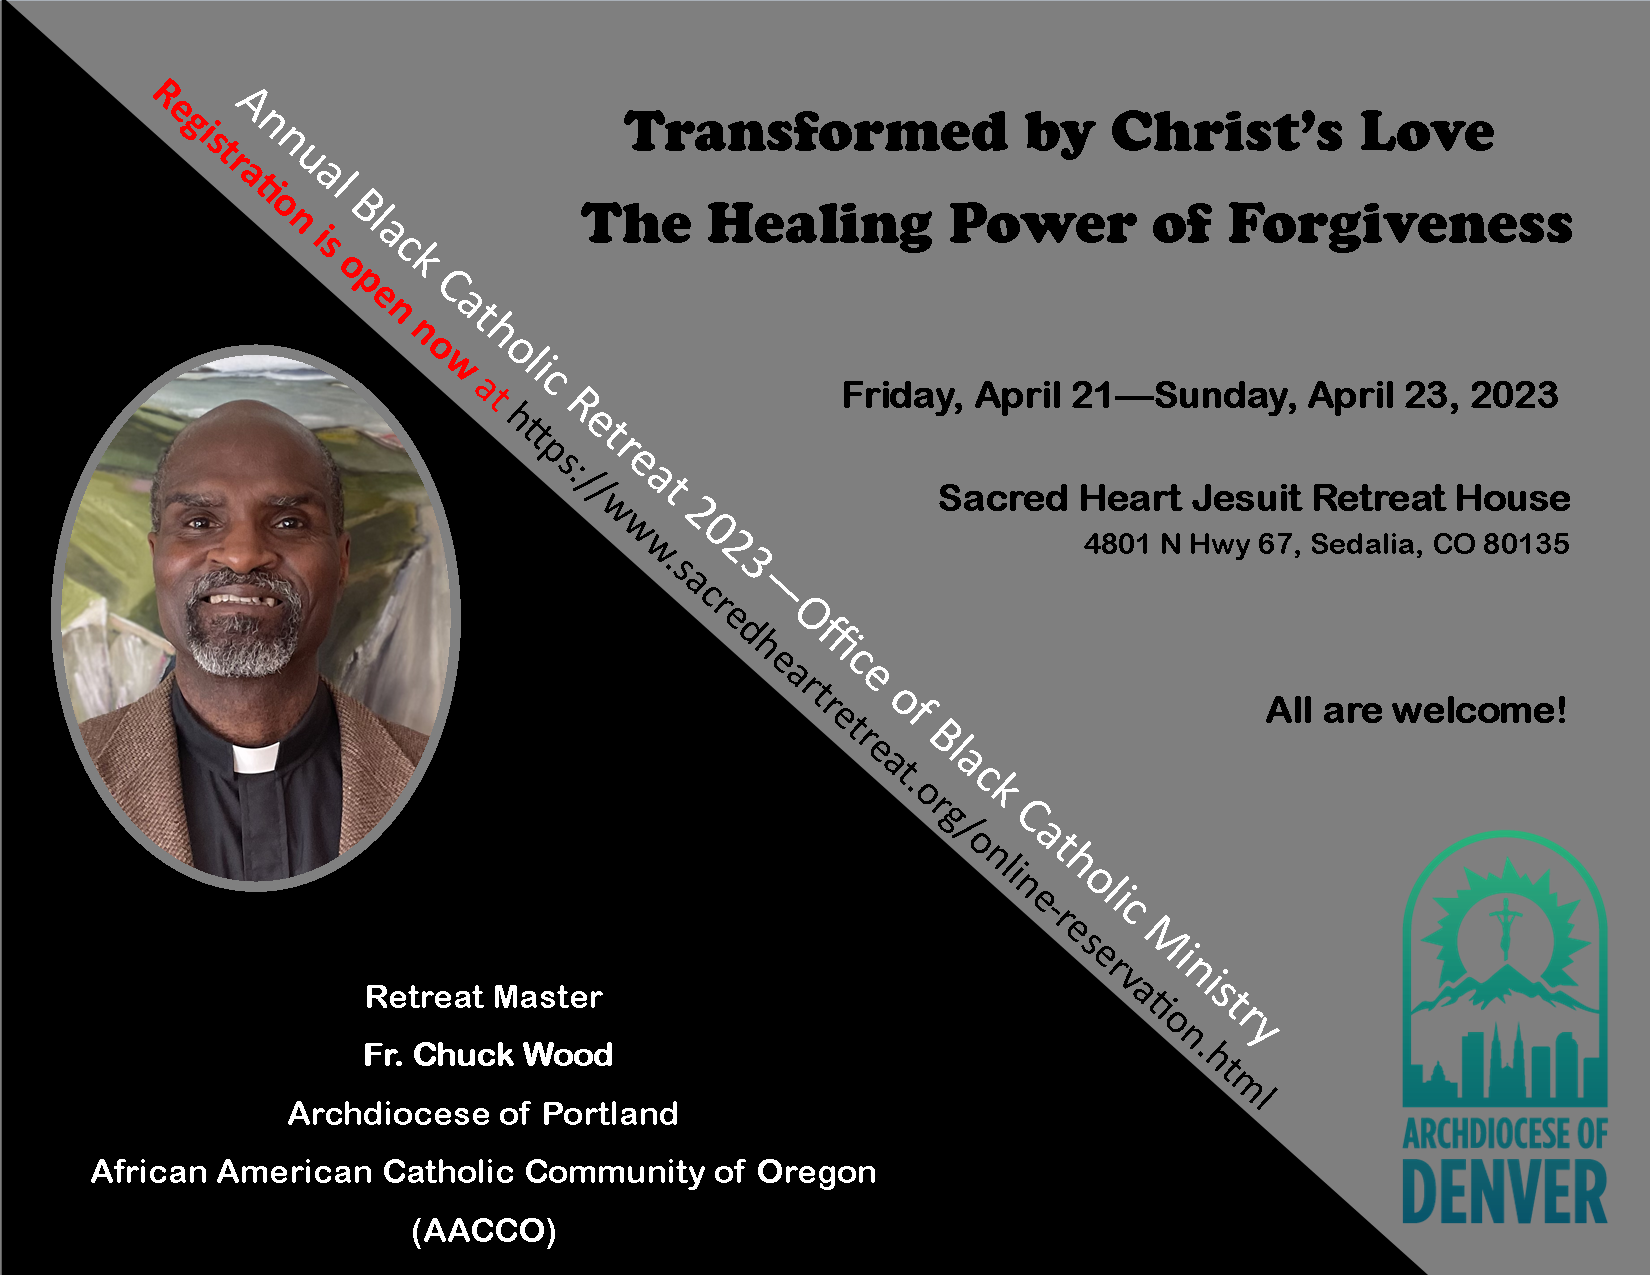 Transformed by Christ's Love - The Healing Power of Foregiveness